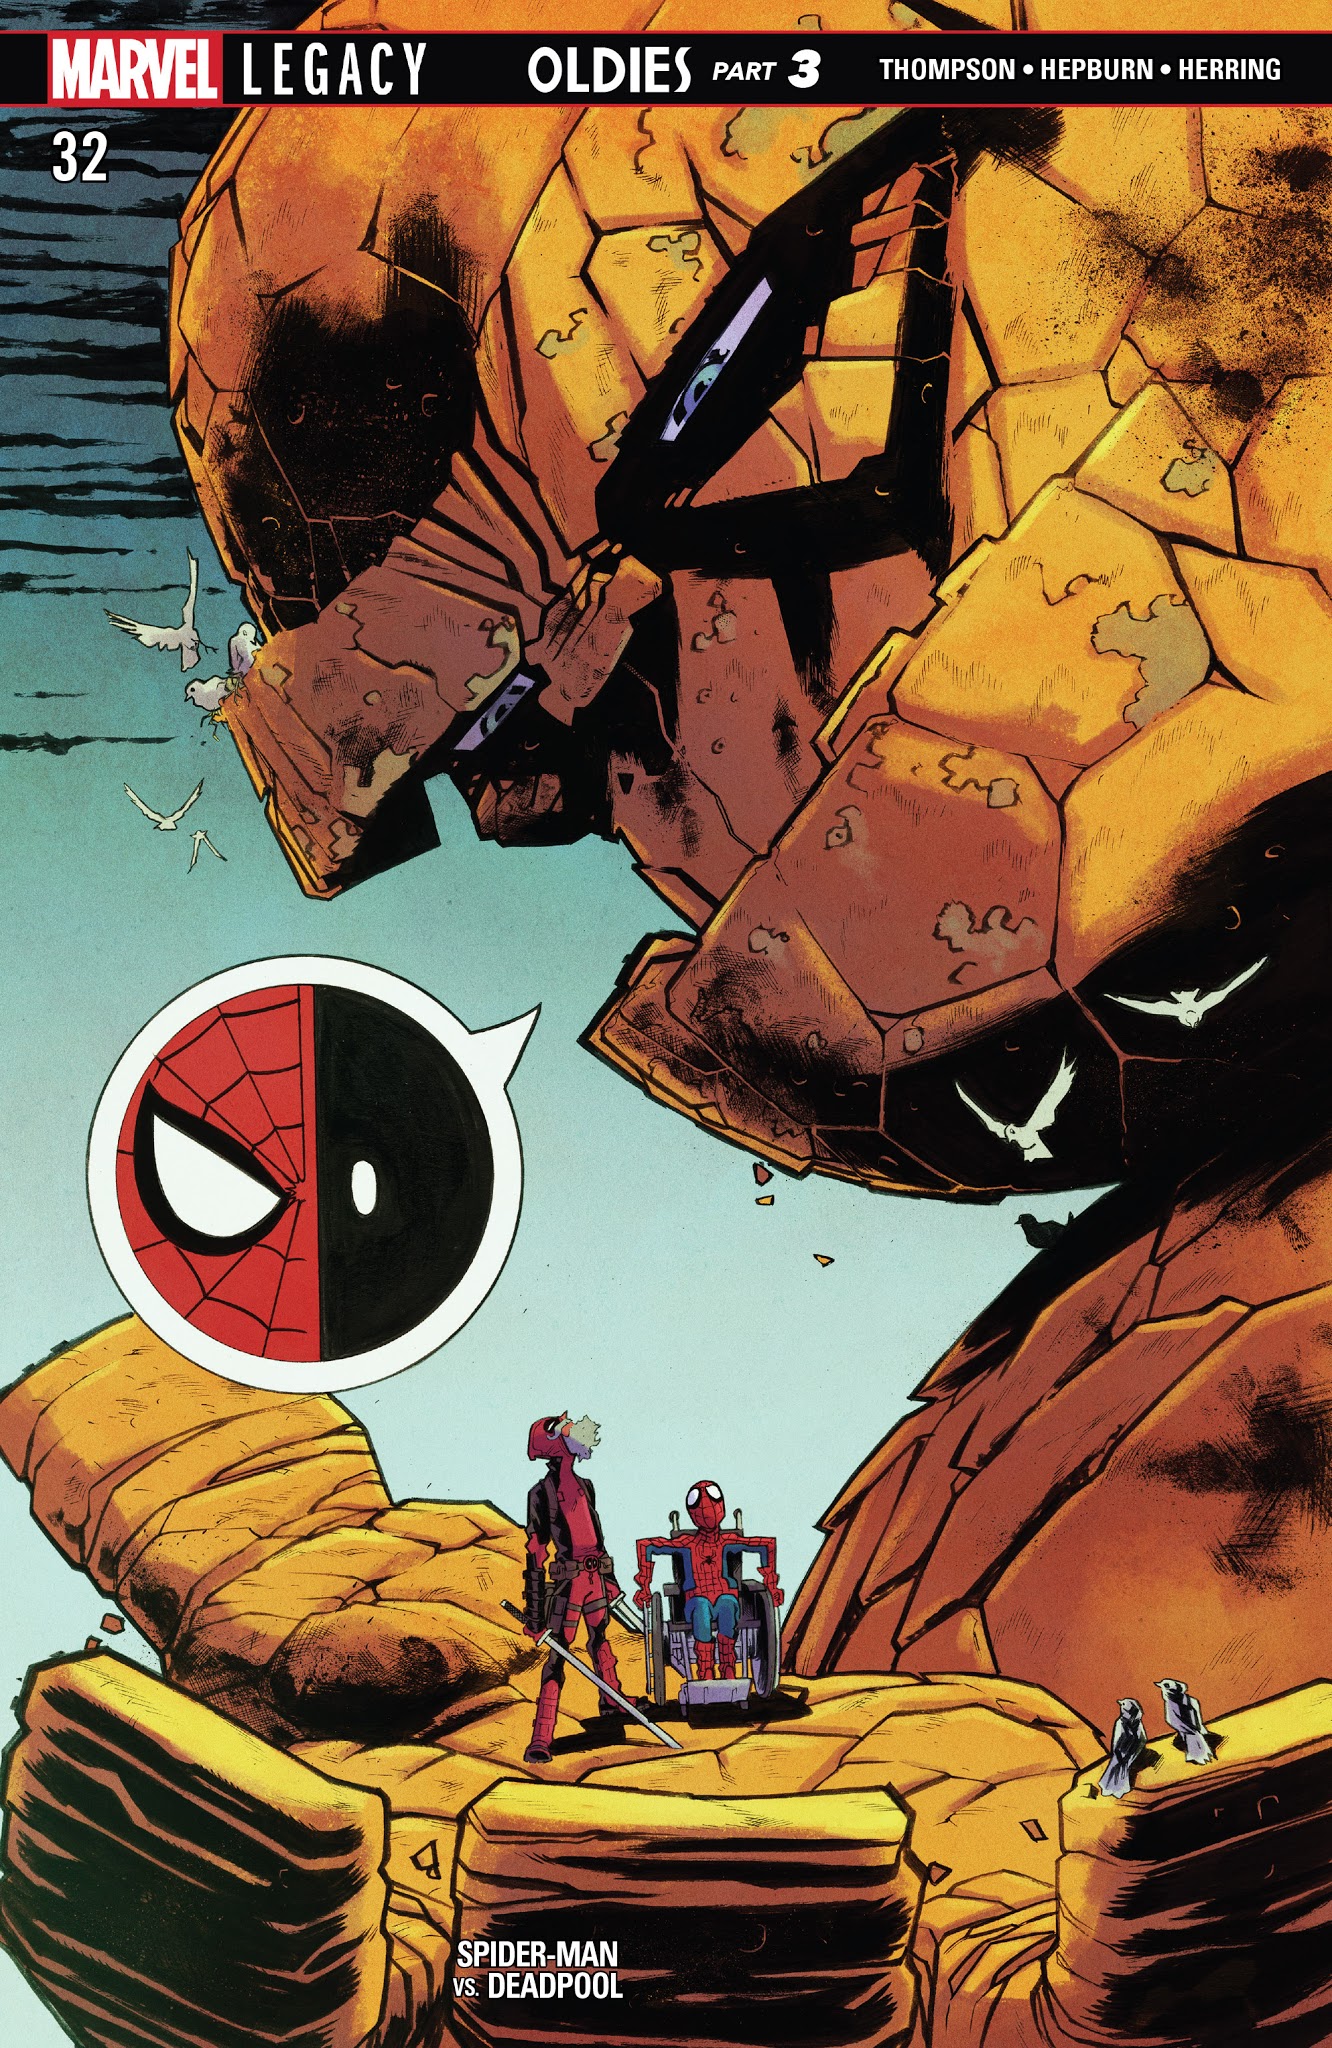 Spider Man Deadpool Issue 32 | Read Spider Man Deadpool Issue 32 comic  online in high quality. Read Full Comic online for free - Read comics online  in high quality .|